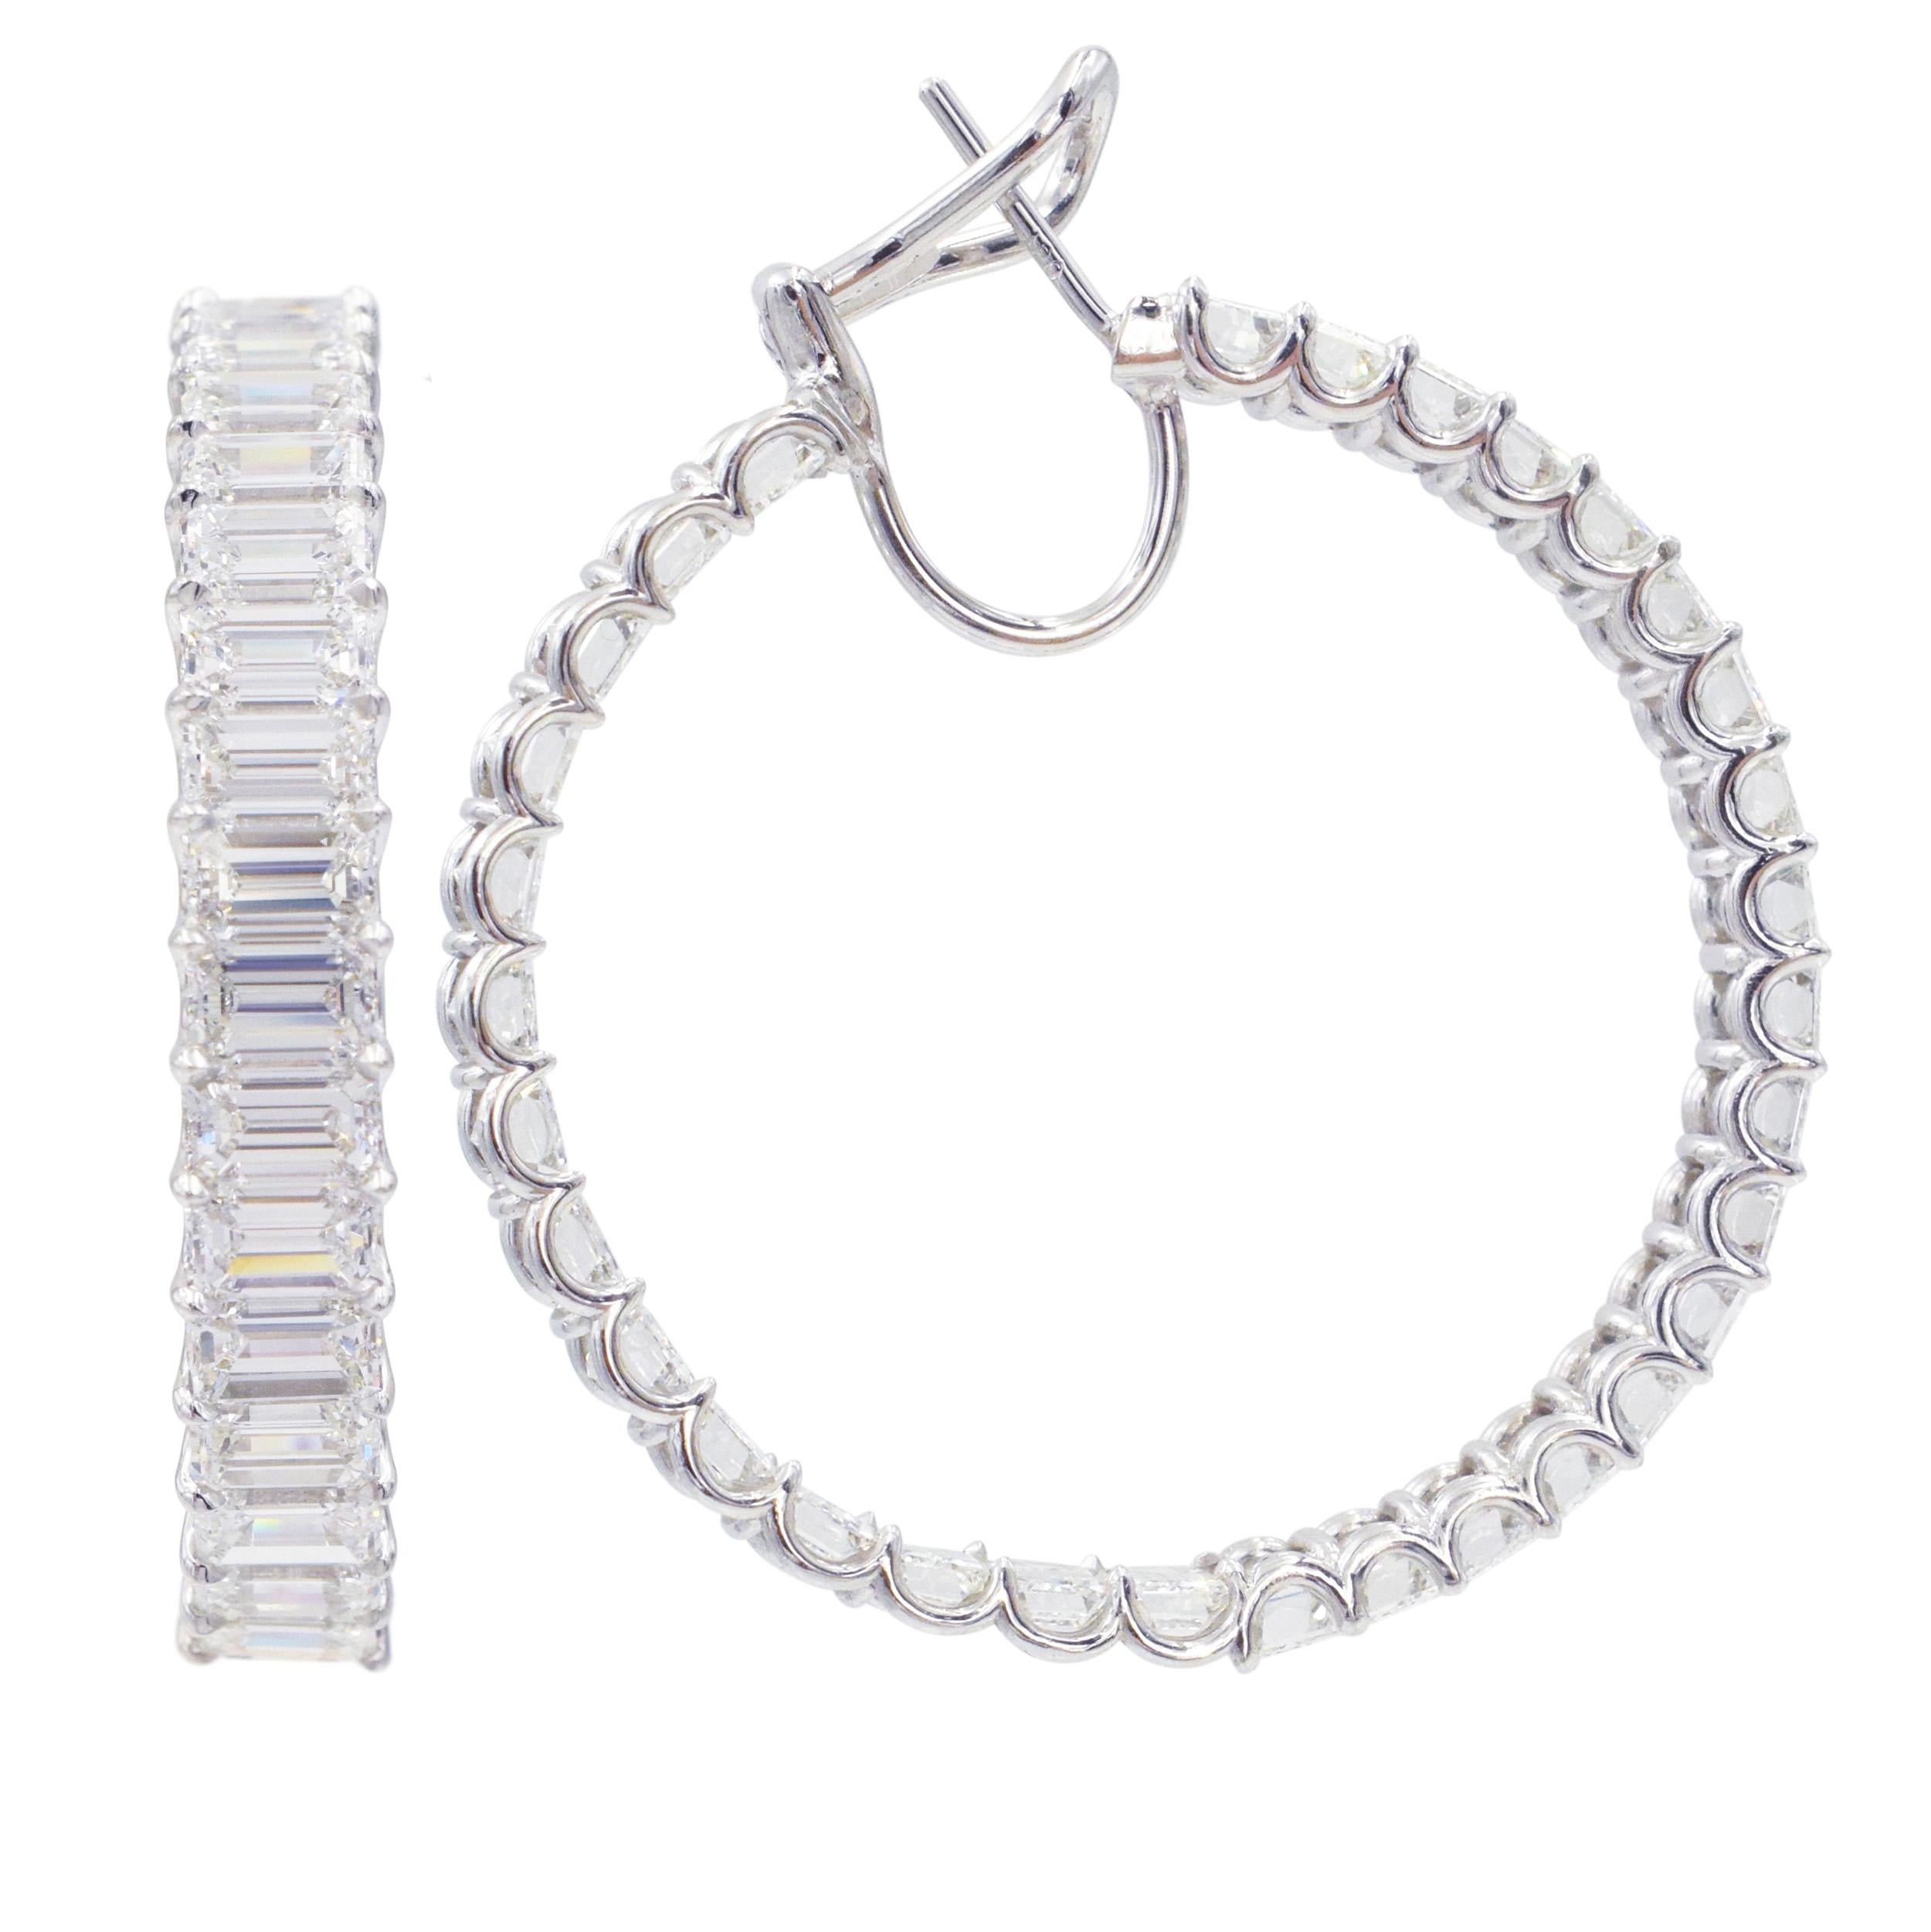 Hoop Earrings Inside-Out with Emerald Cut Diamonds For Sale 3